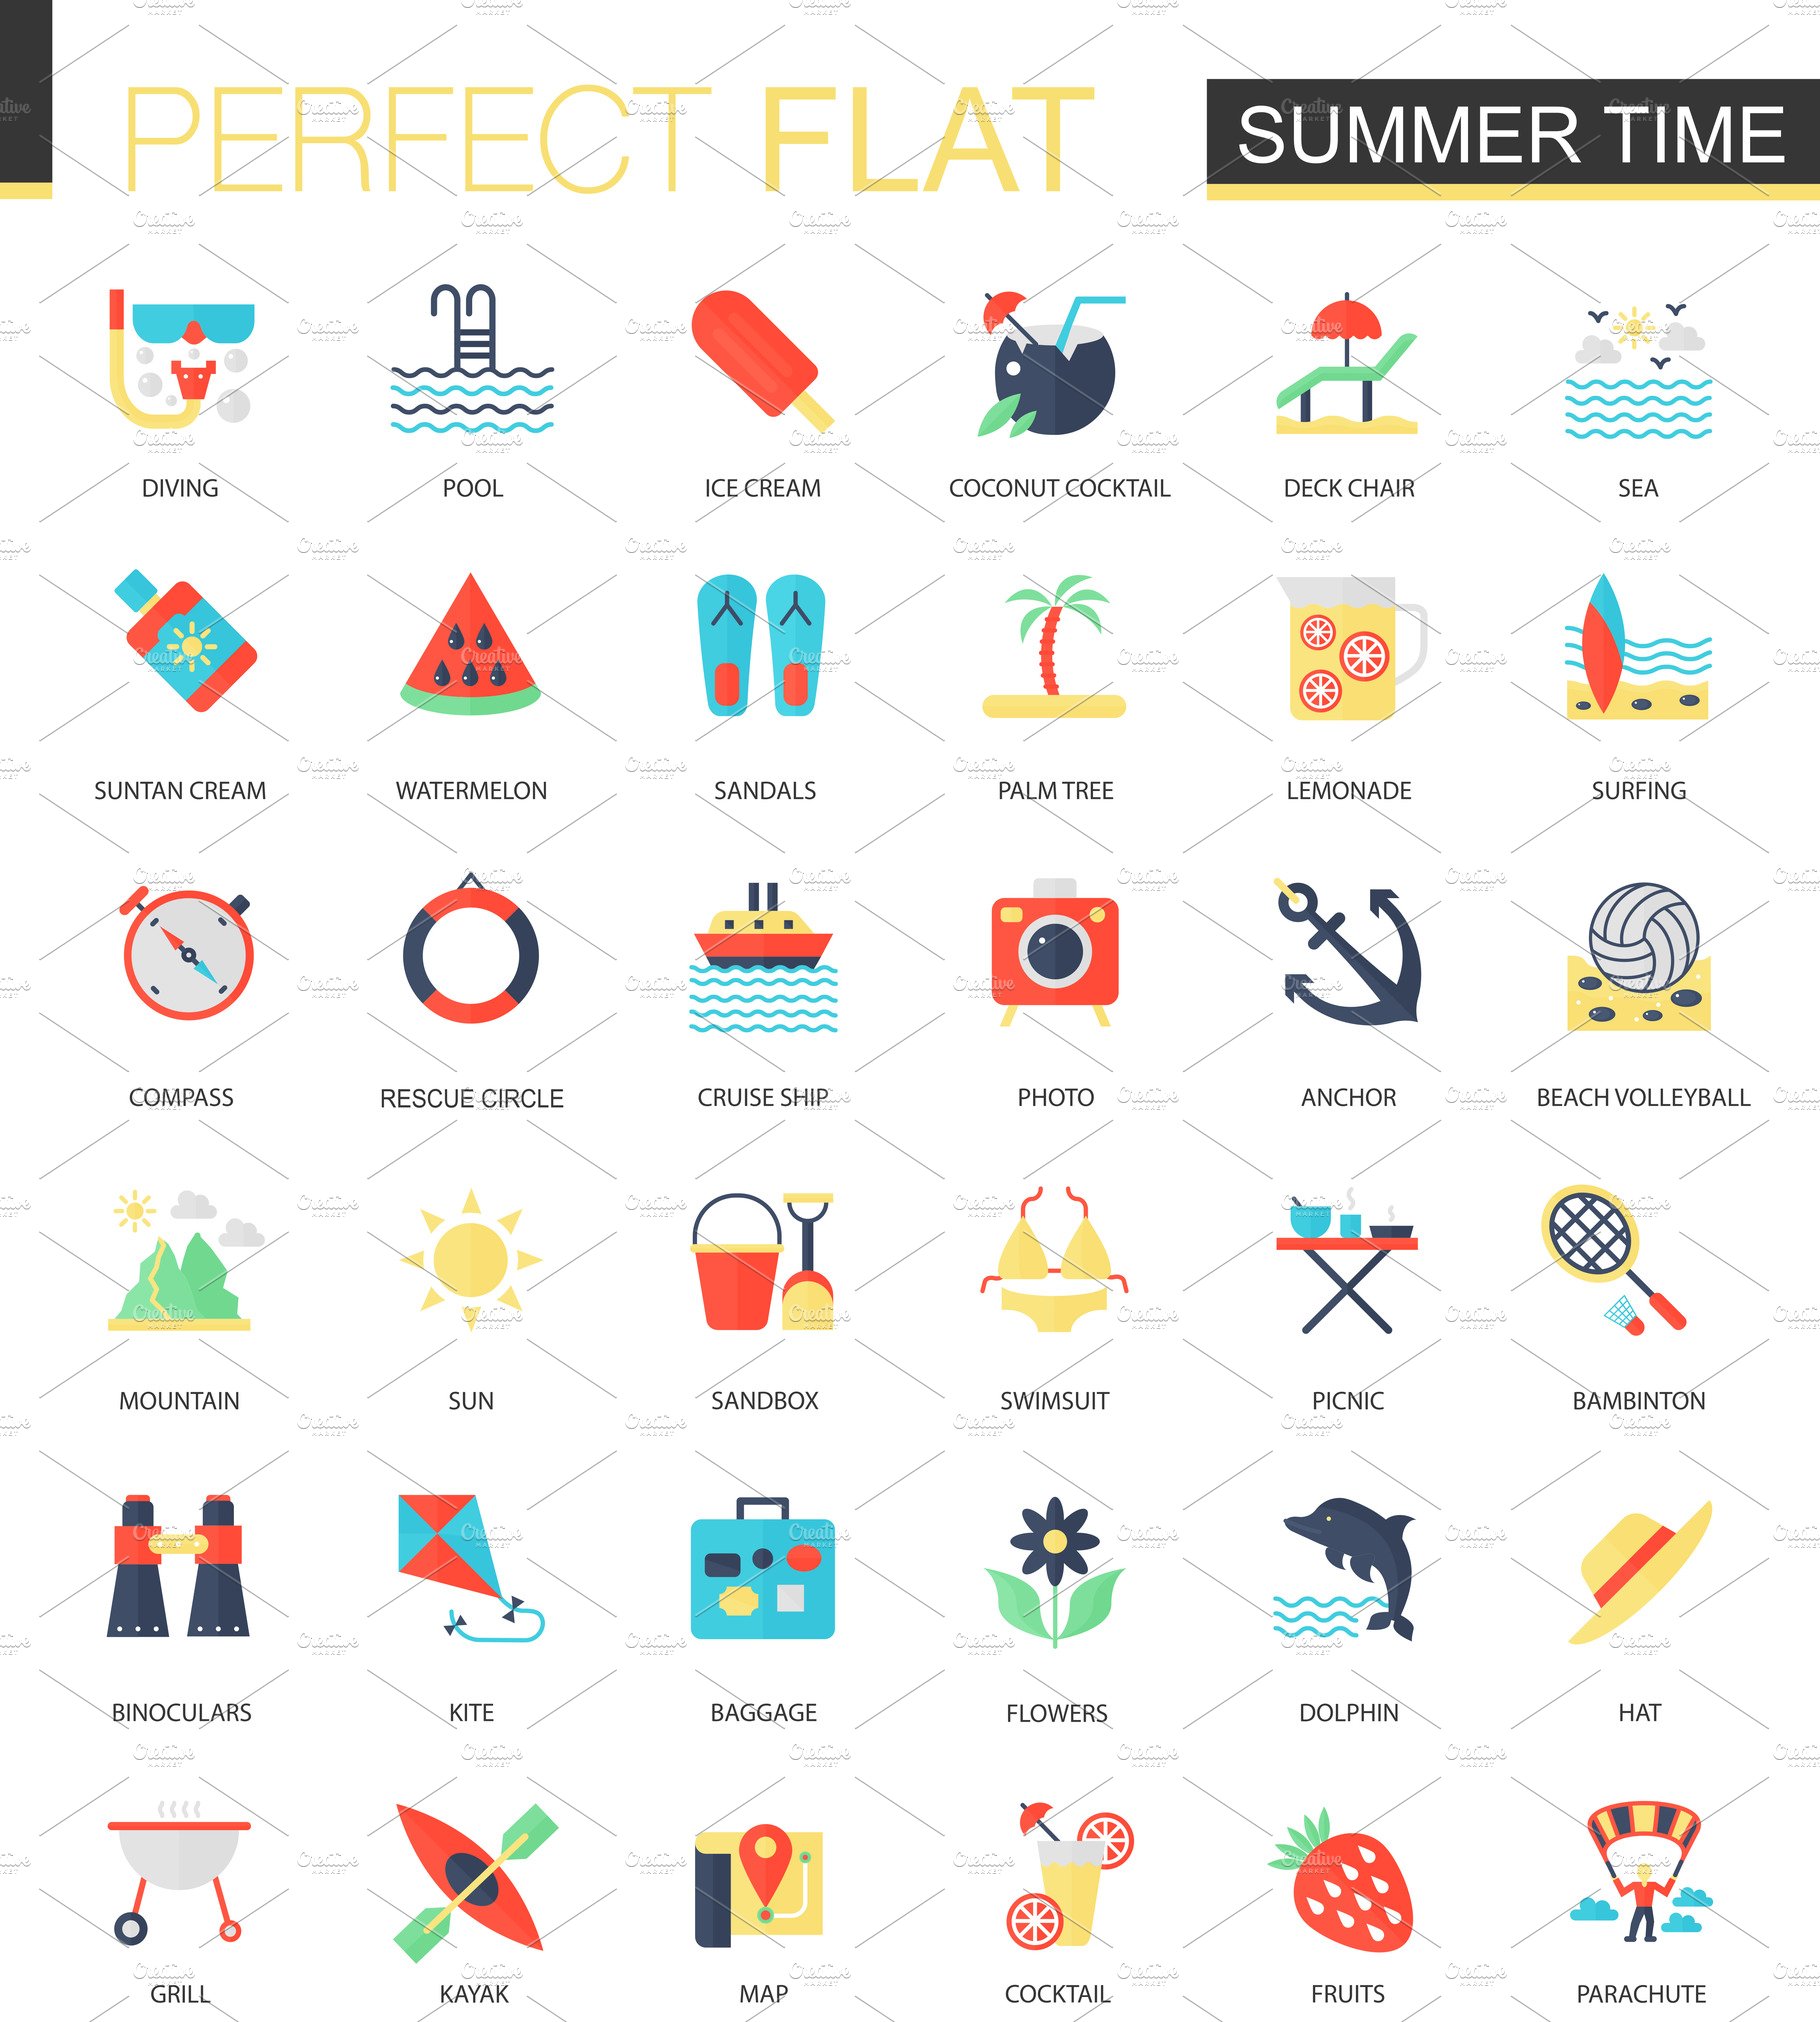 Summer time icons. cover image.